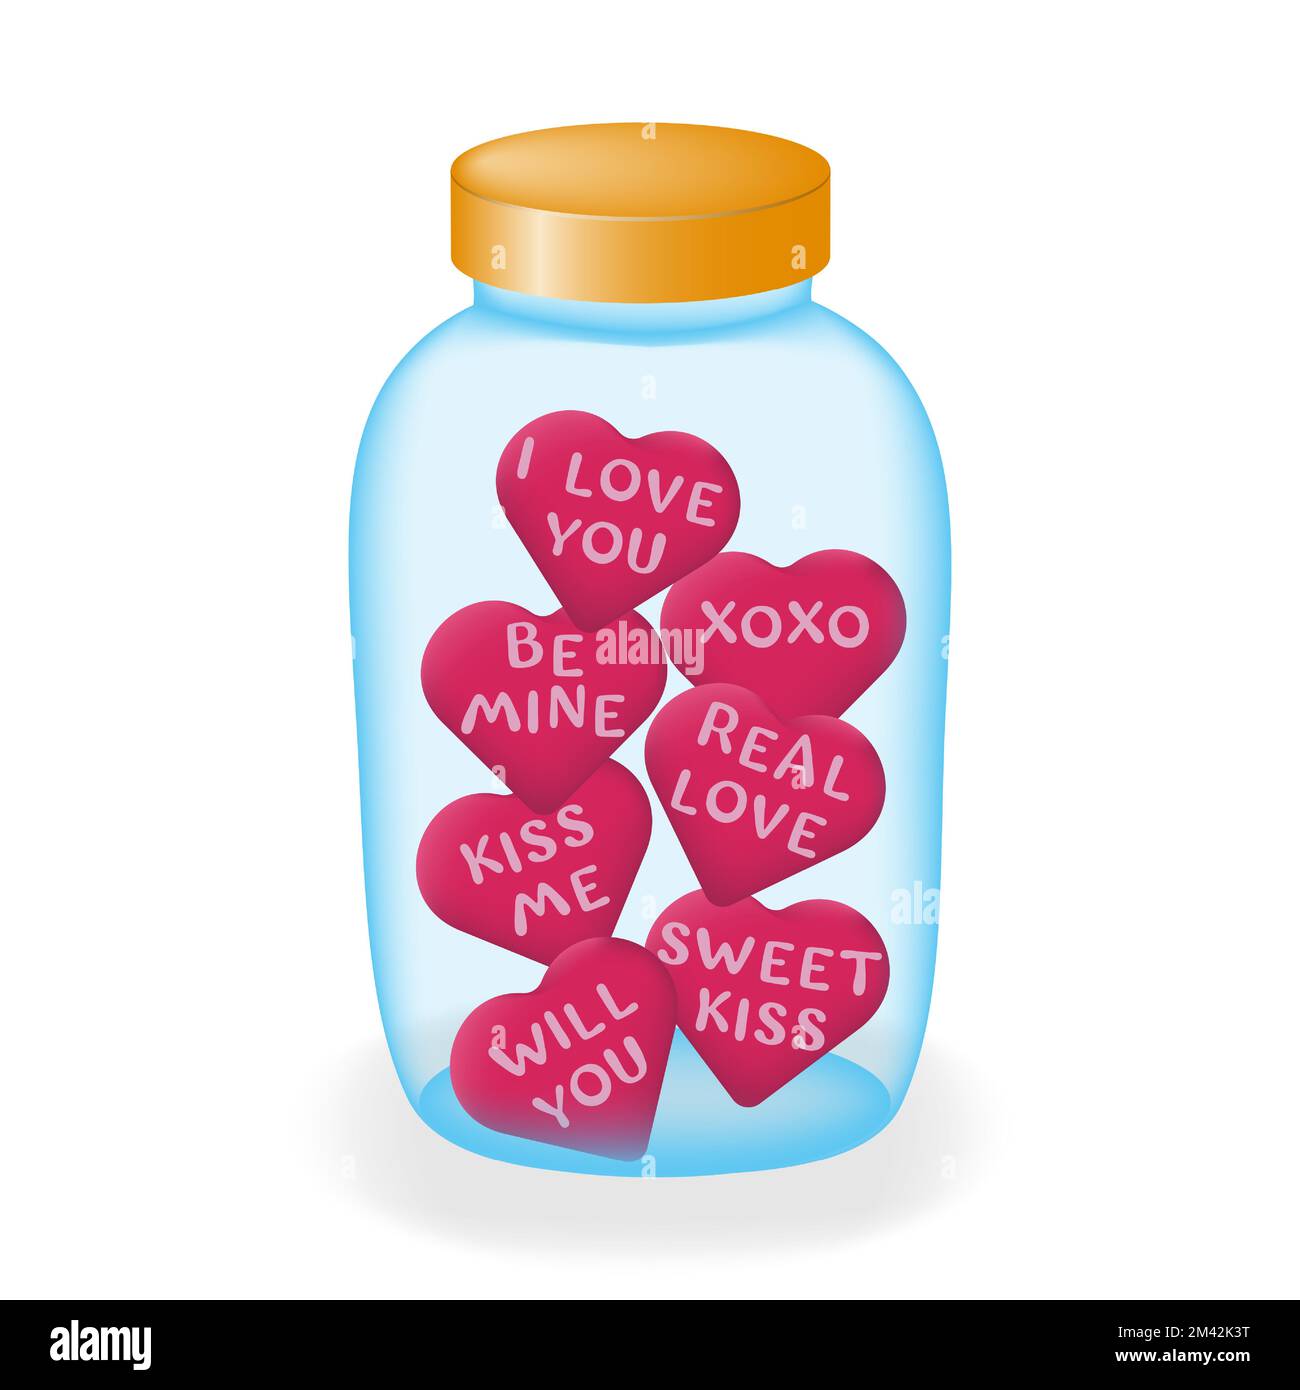 https://c8.alamy.com/comp/2M42K3T/glass-jar-with-hearts-a-cartoon-glass-candy-jar-in-the-shape-of-a-pink-heart-with-cute-love-messages-the-concept-of-love-and-celebrating-valentines-2M42K3T.jpg